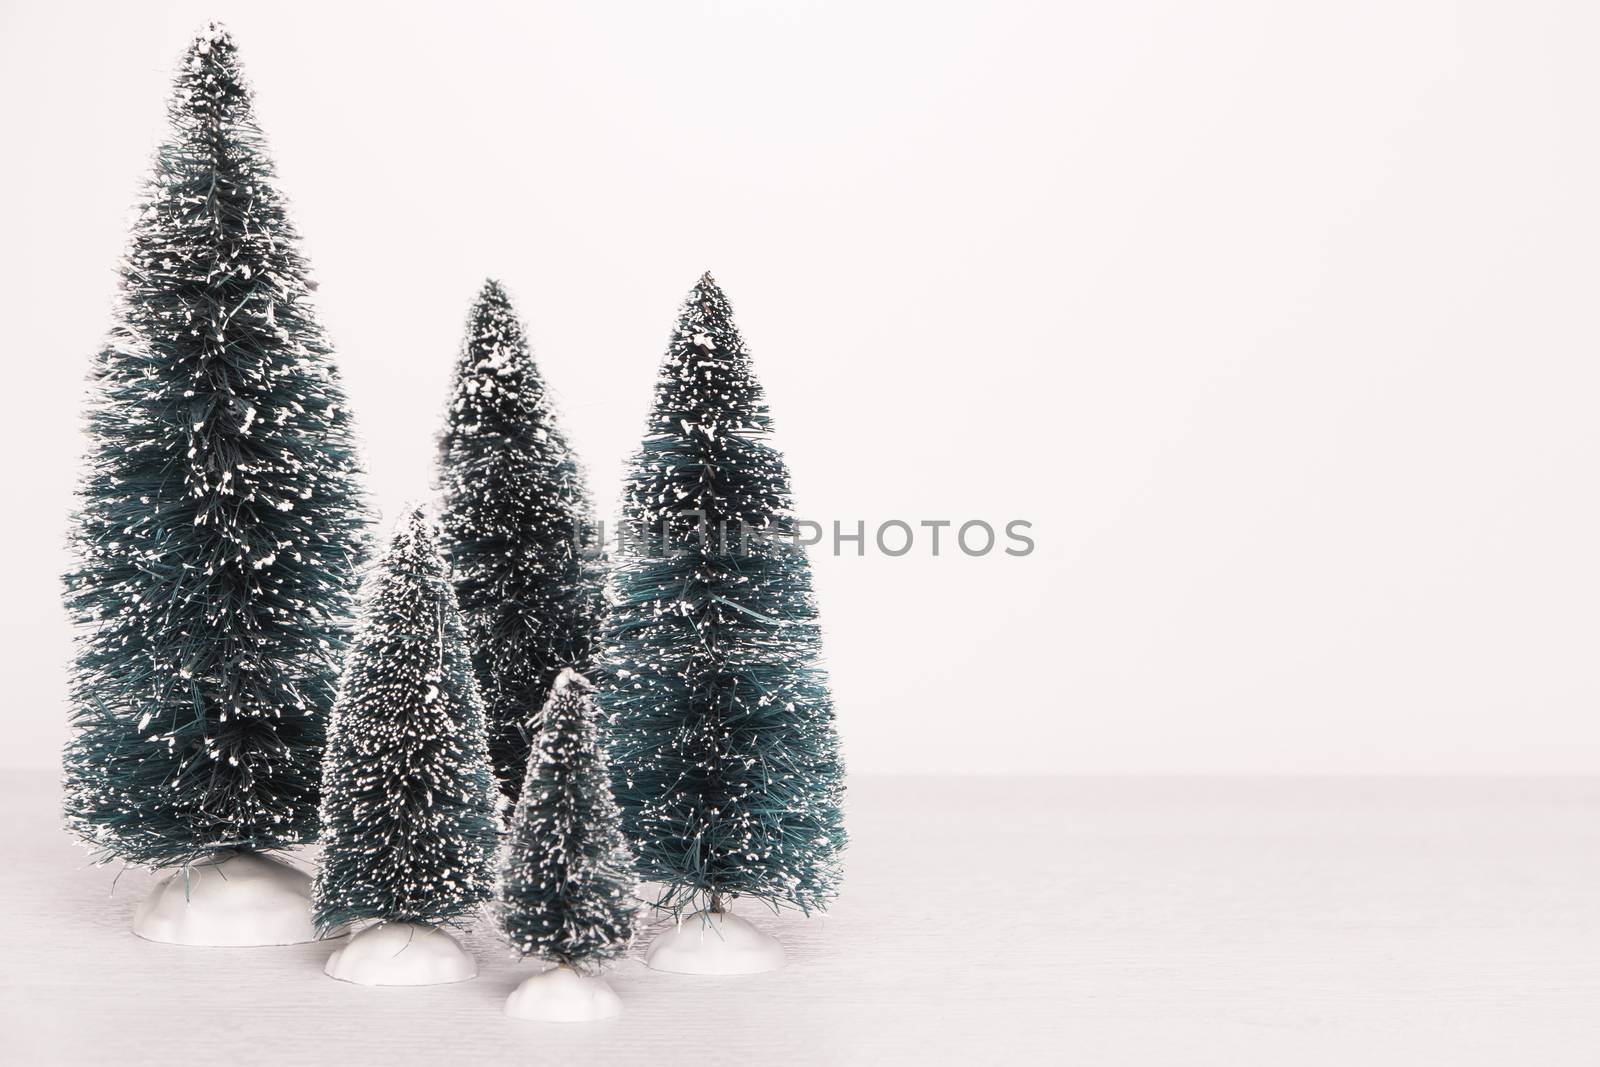 Miniature evergreen trees on white wooden board